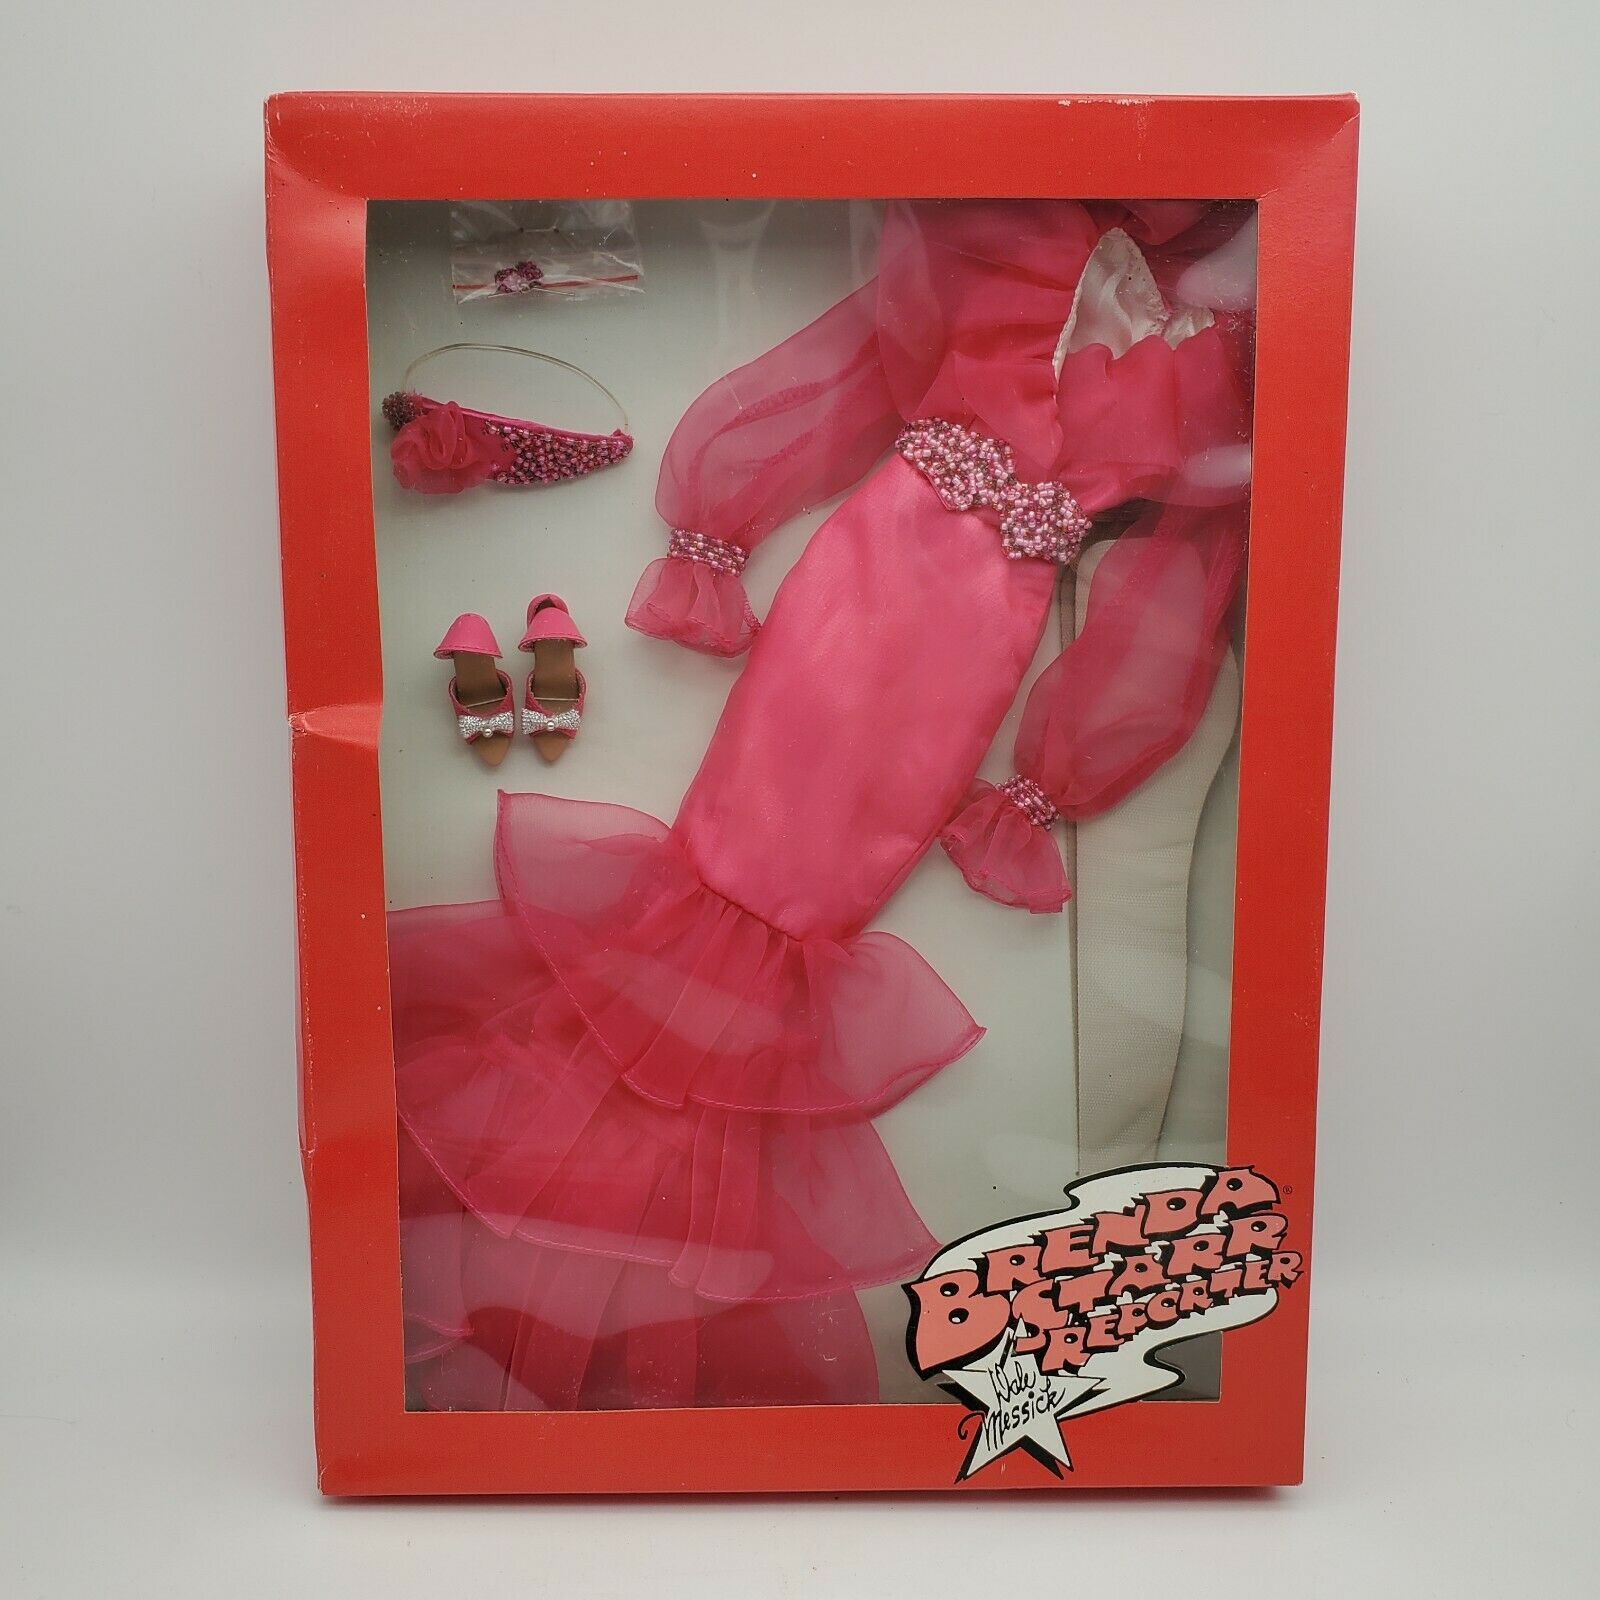 2006 Tonner/effanbee 16" Brenda Starr Reporter Pink Obsession Outfit Nrfb